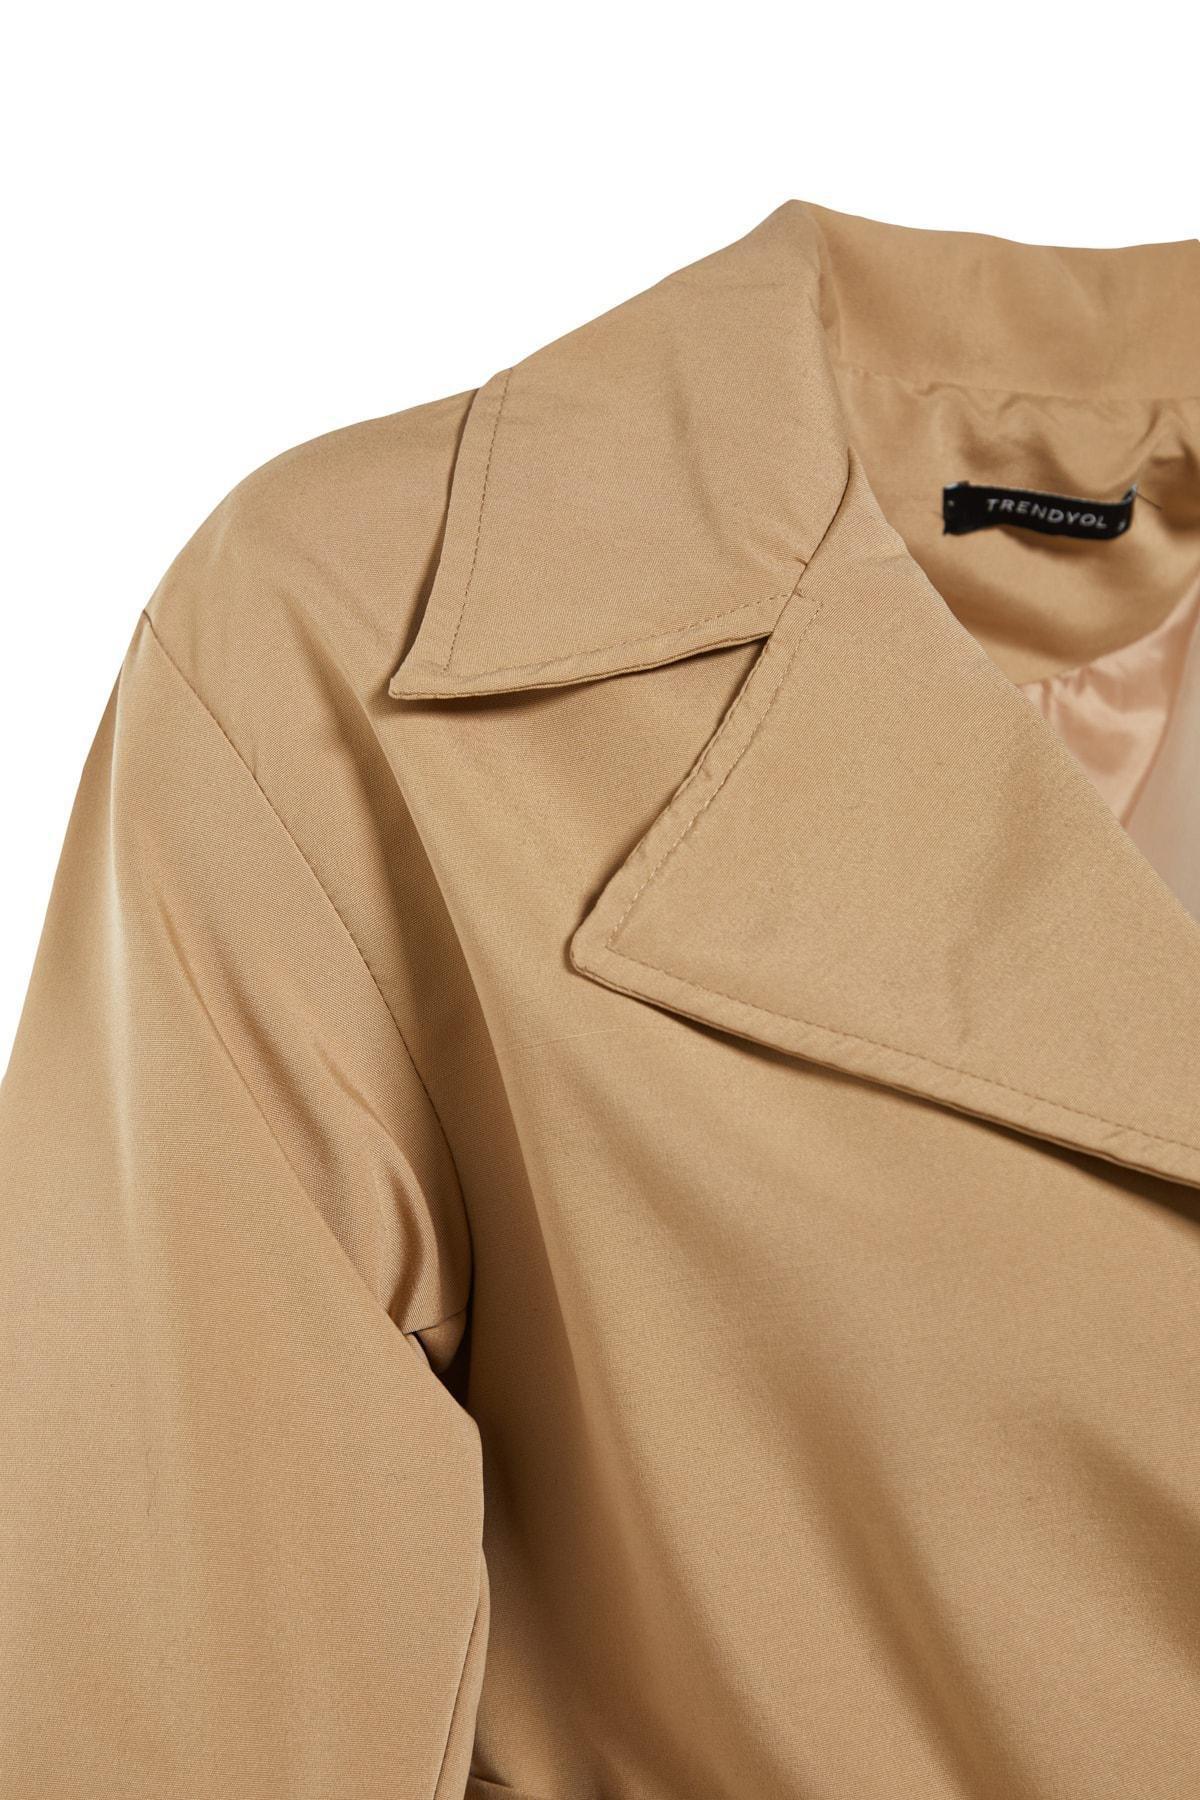 Trendyol - Beige Double Breasted Trench Coat